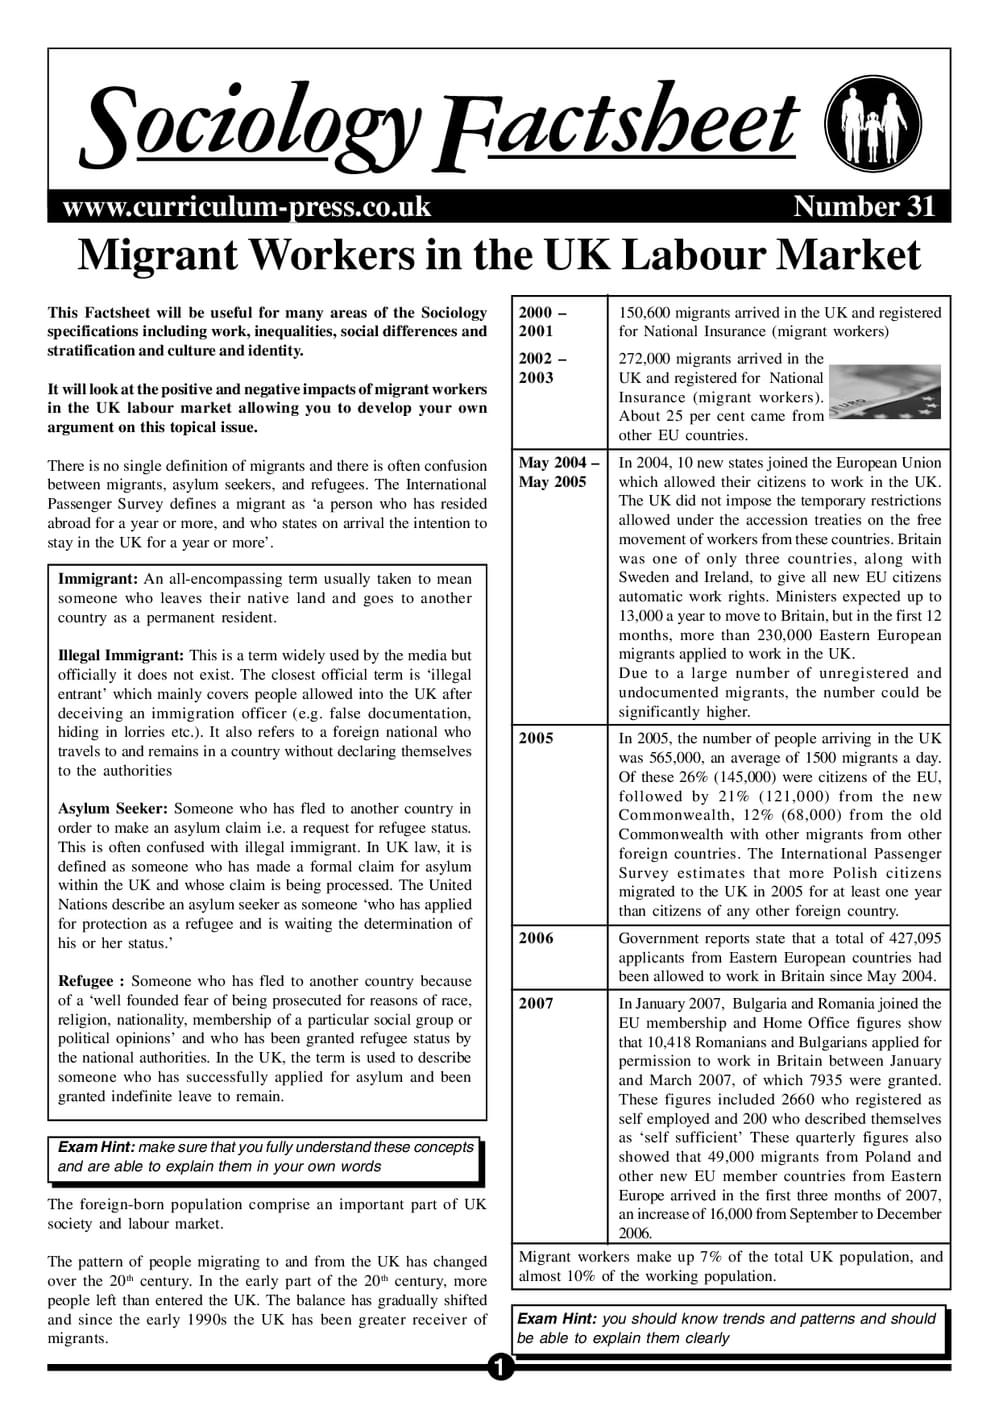 31 Migrant Workers